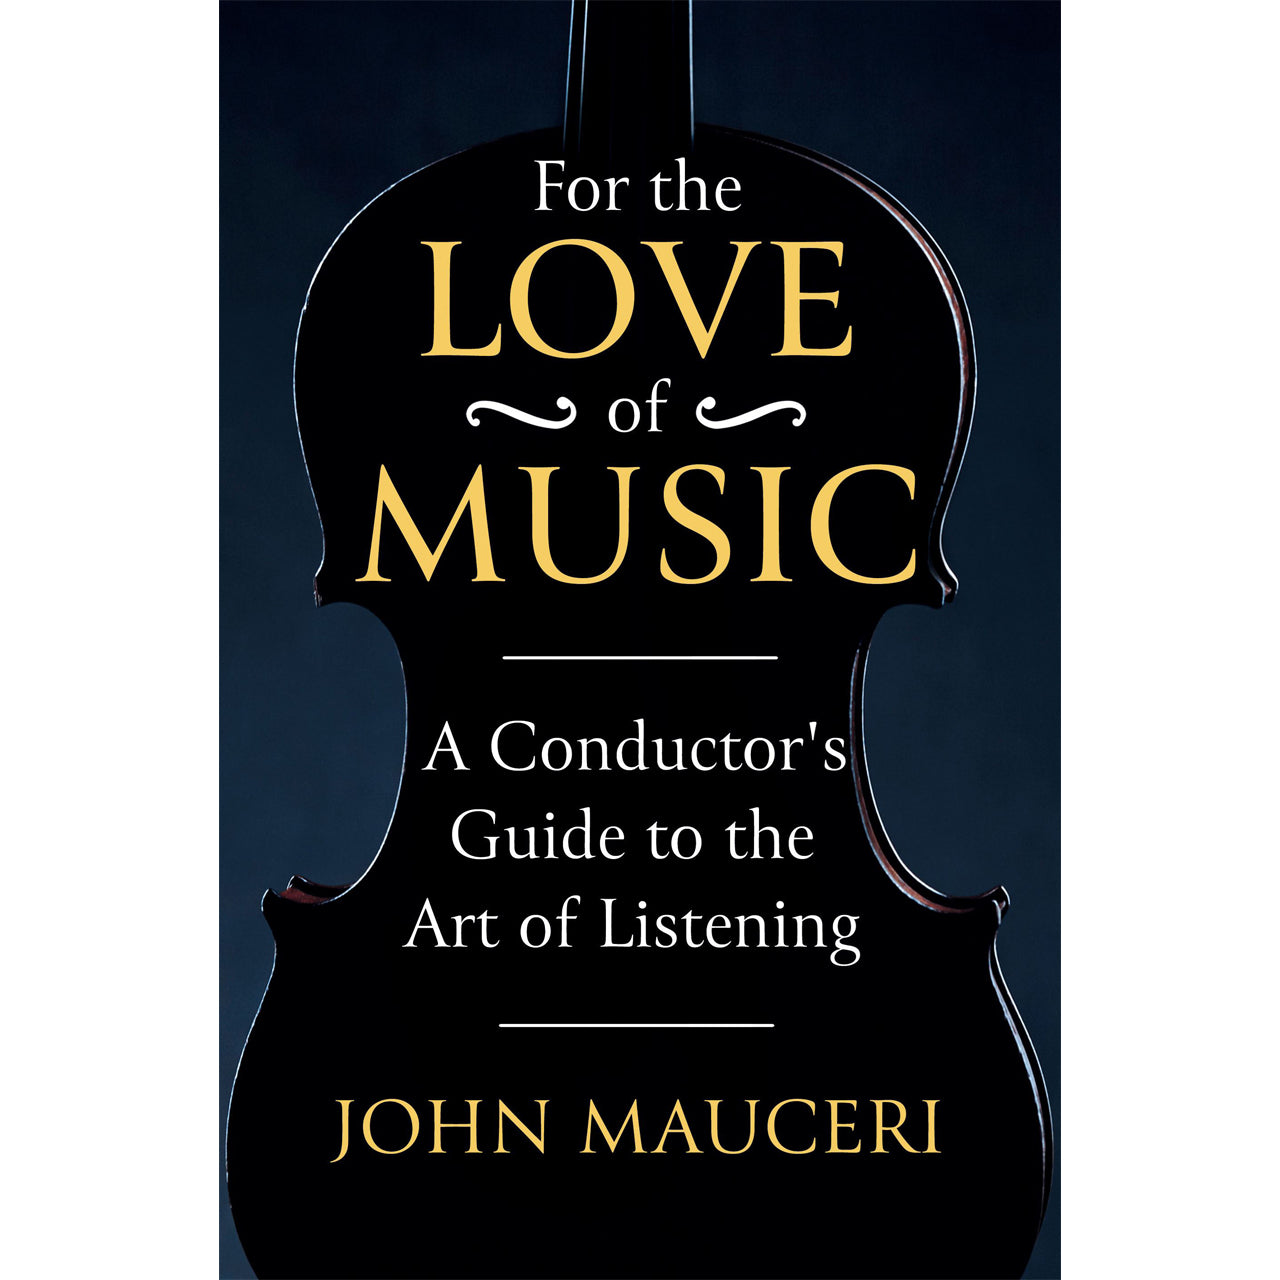 For the Love of Music. A Conductor's Guide to the Art of Listening by John Mauceri Glyndebourne Shop